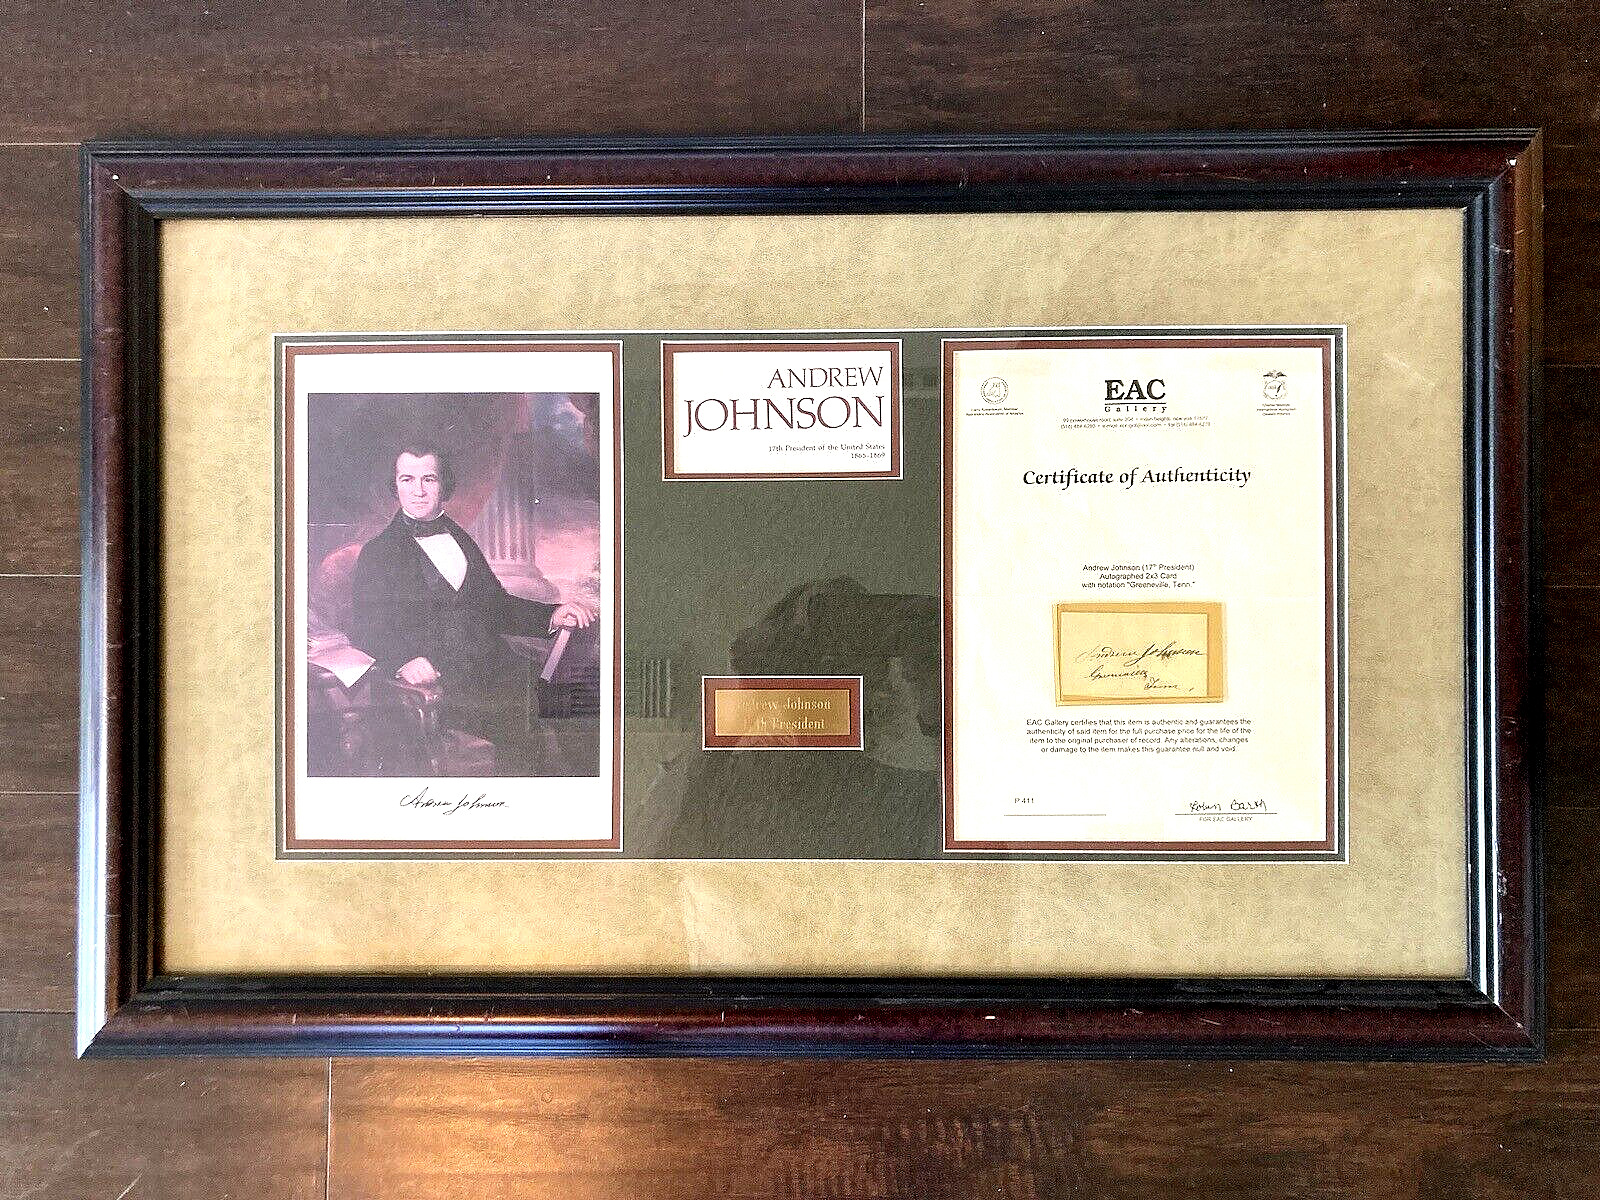 PRESIDENT Andrew Johnson AUTO Framed AUTOGRAPH 17th President  EAC CoA AUTHENTIC